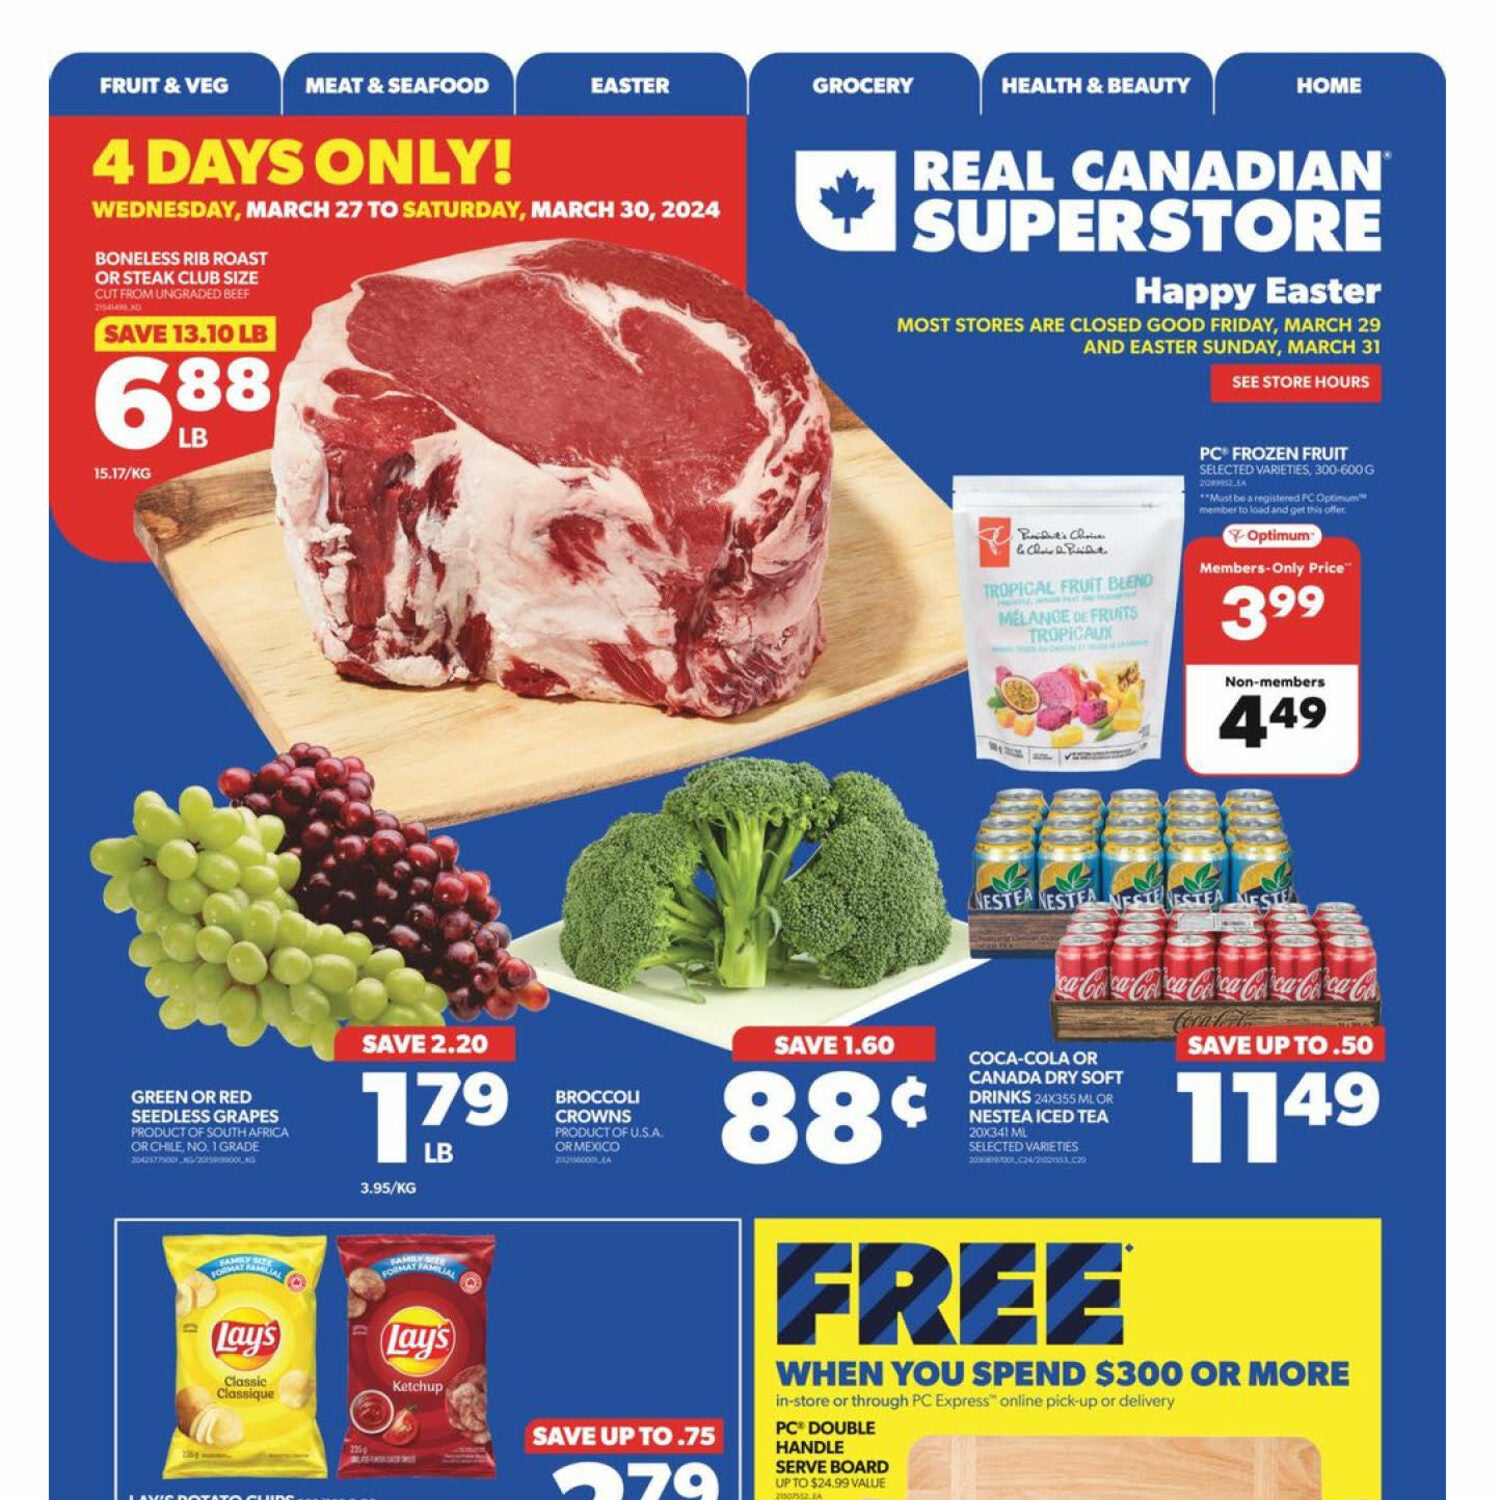 Ungraded Mexican beef at the Superstore! When did this start